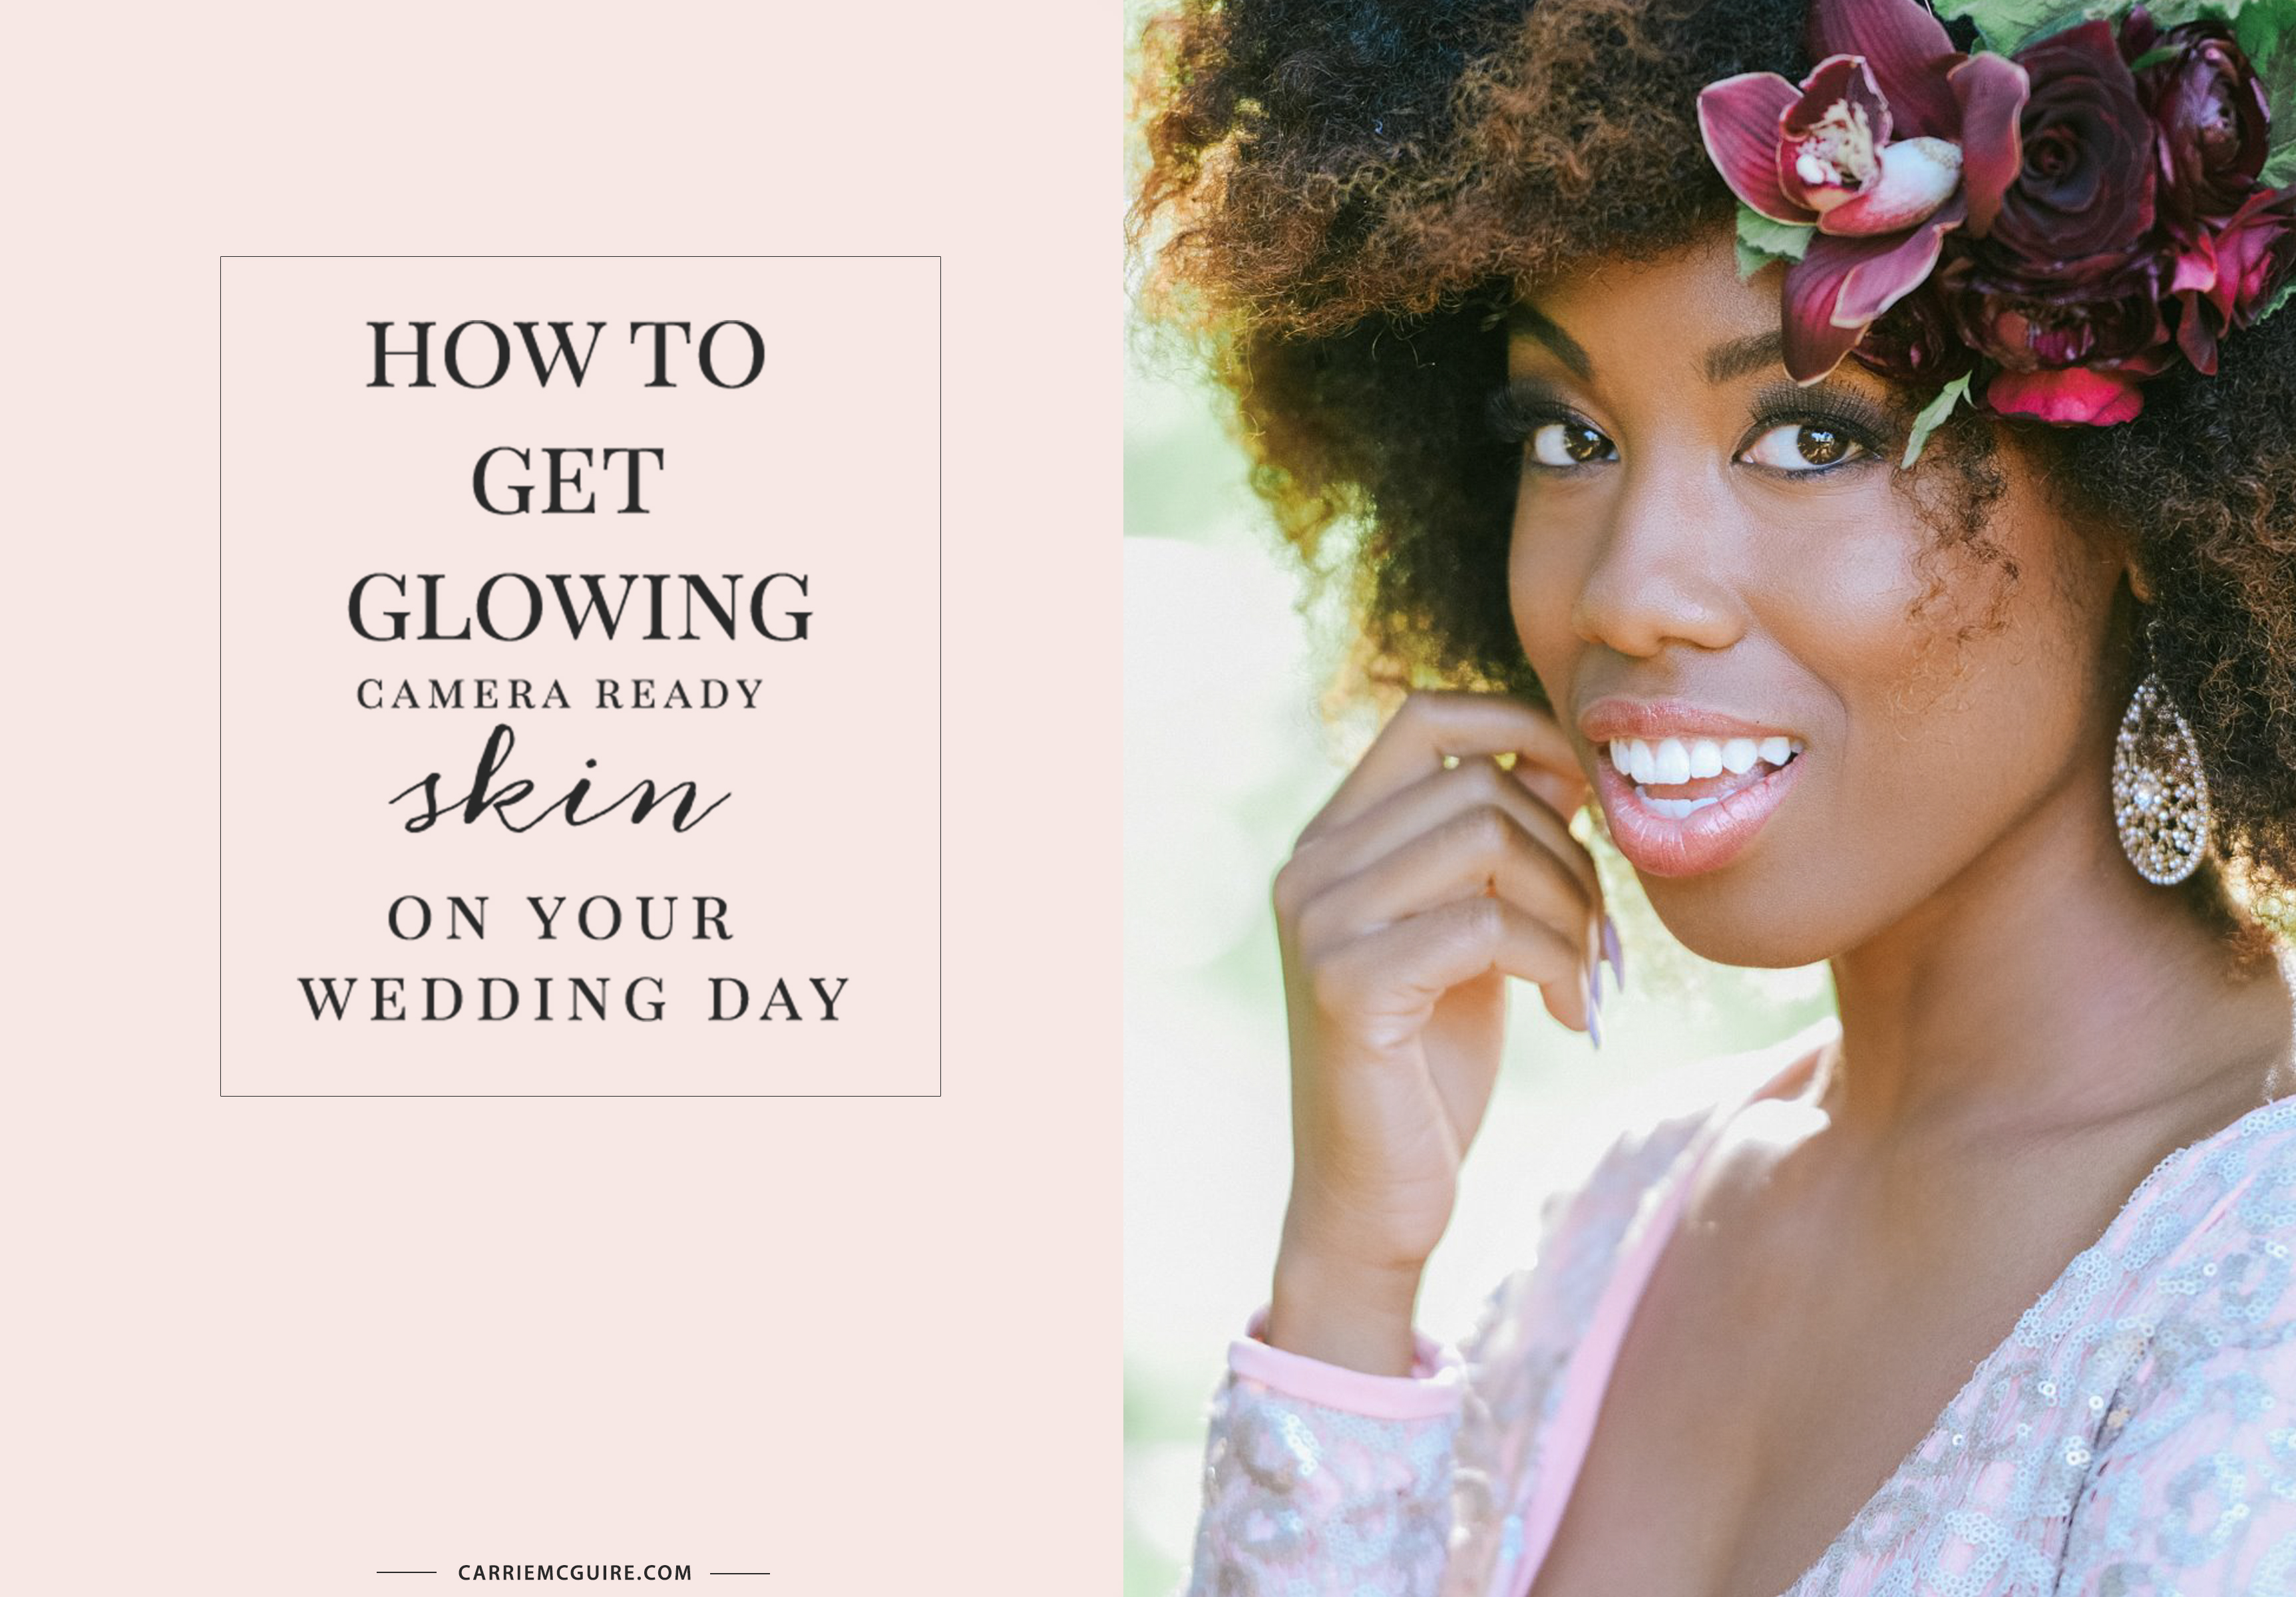 How to get glowing camera ready skin on your wedding day.